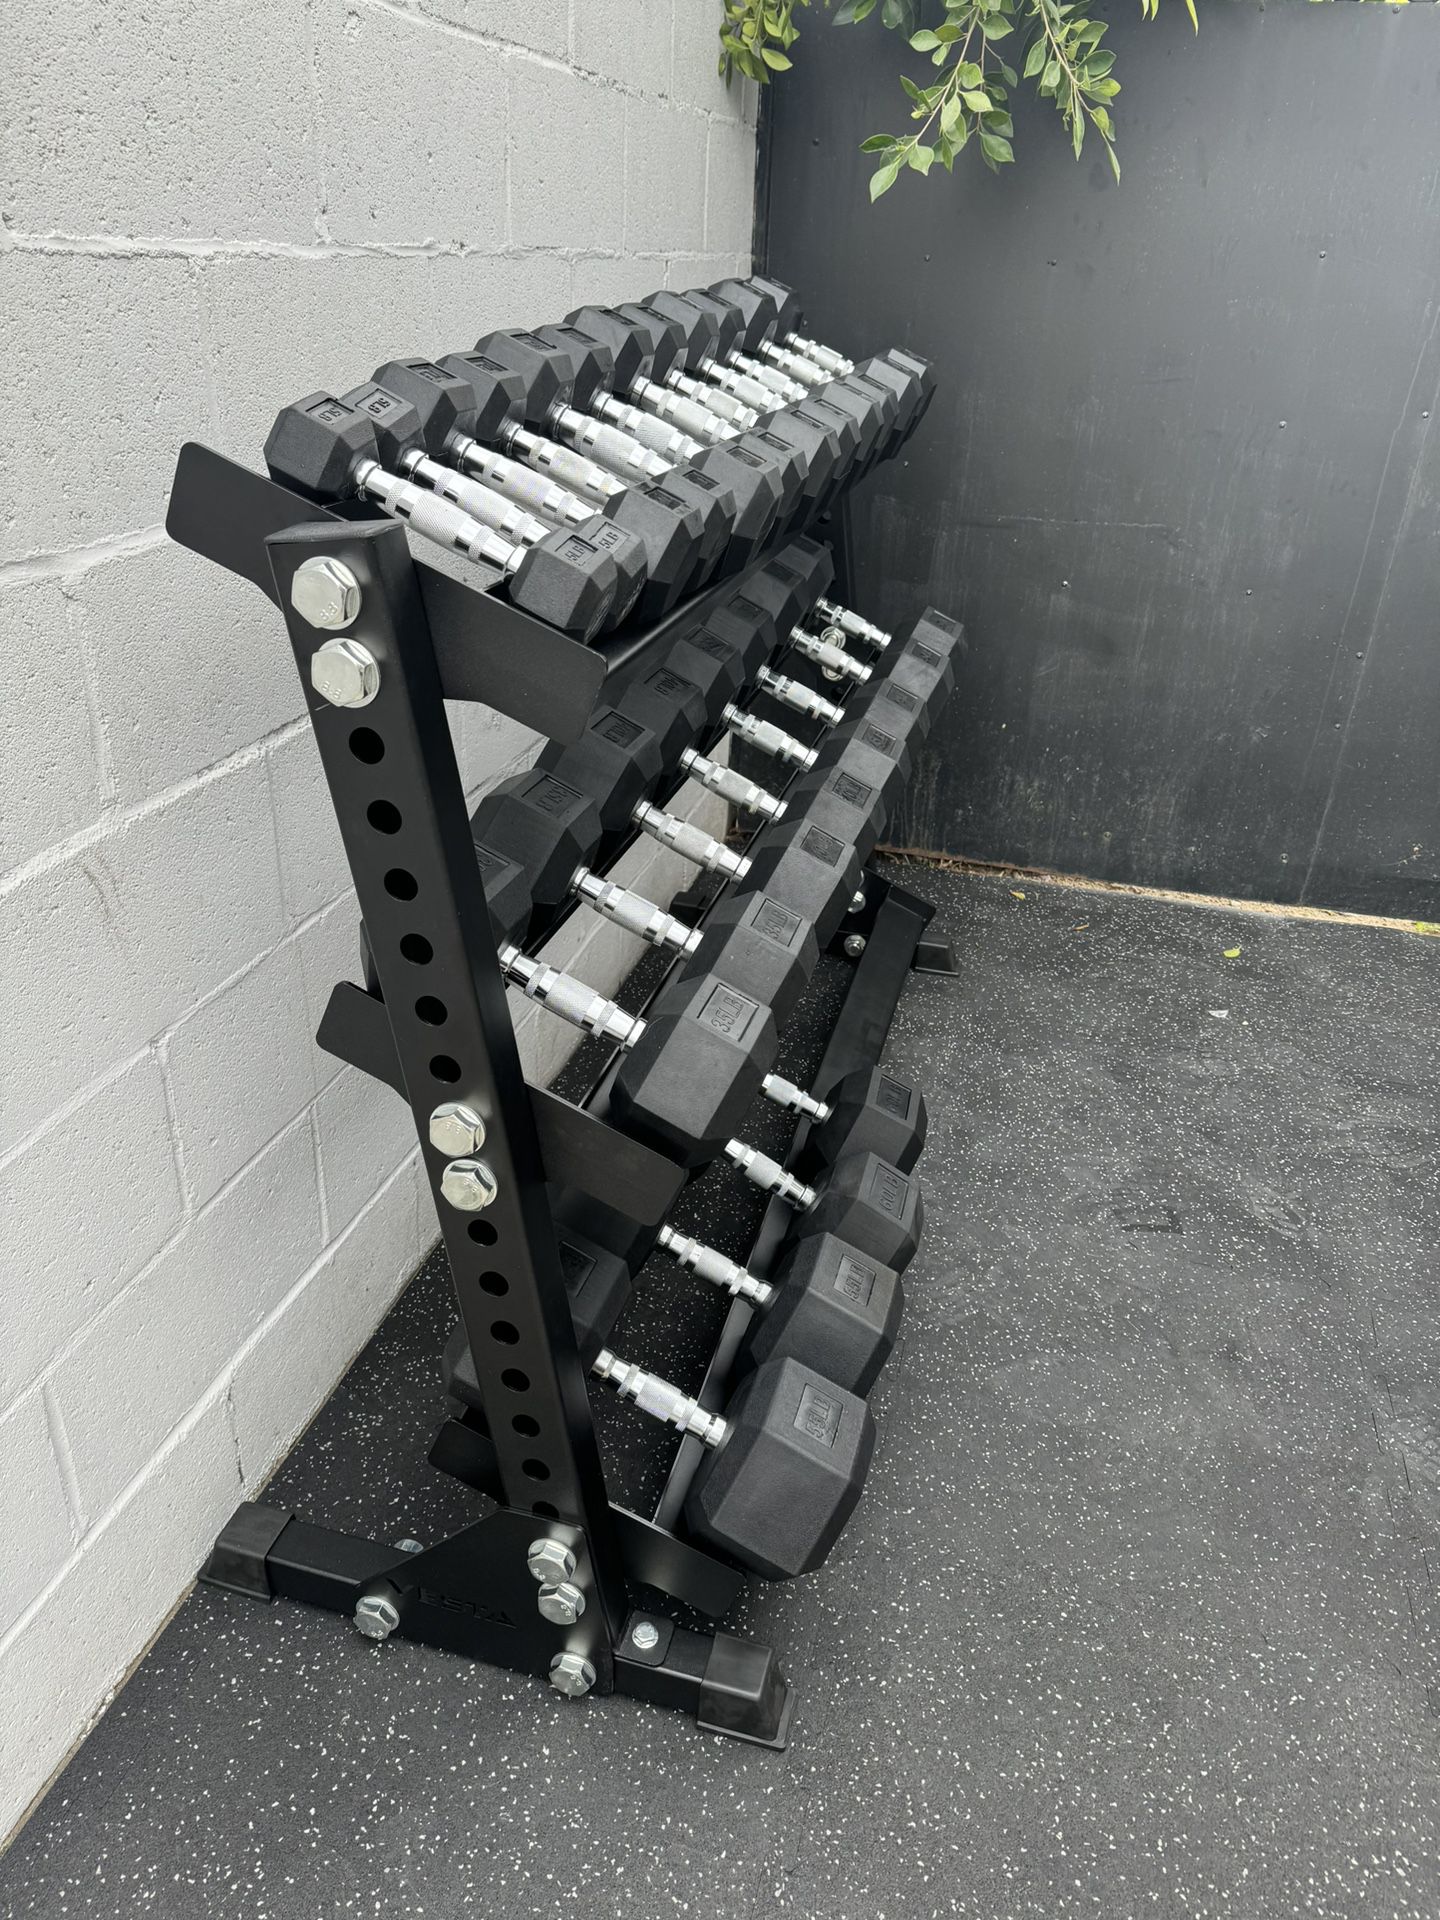  New Rubber Hex Dumbbells 5lbs-50lbs/Dumbbell rack included/ Gym Equipment/Weights/Exercise/Training